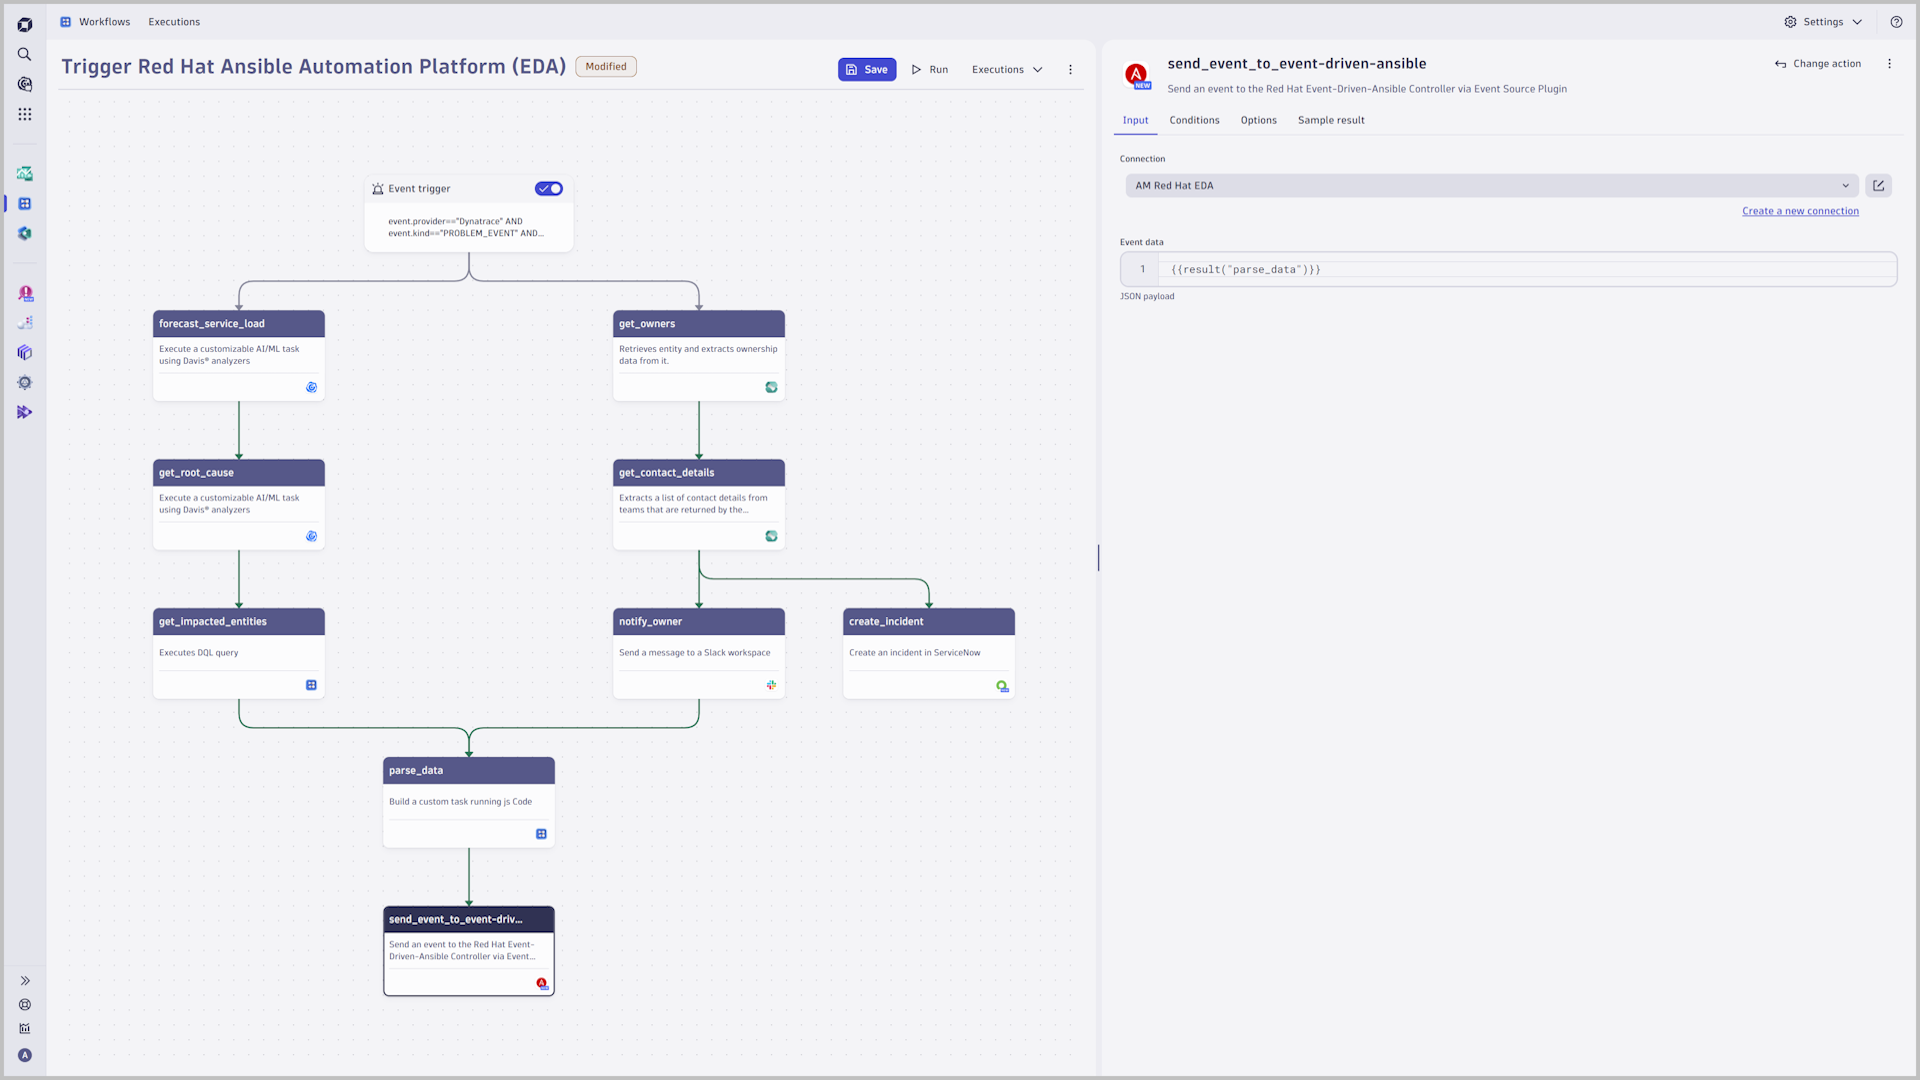 The workflow leverages Davis predictive analysis, informs relevant stakeholders and enriches data being sent to Event Driven Ansible for exact rulebook to playbook matching.